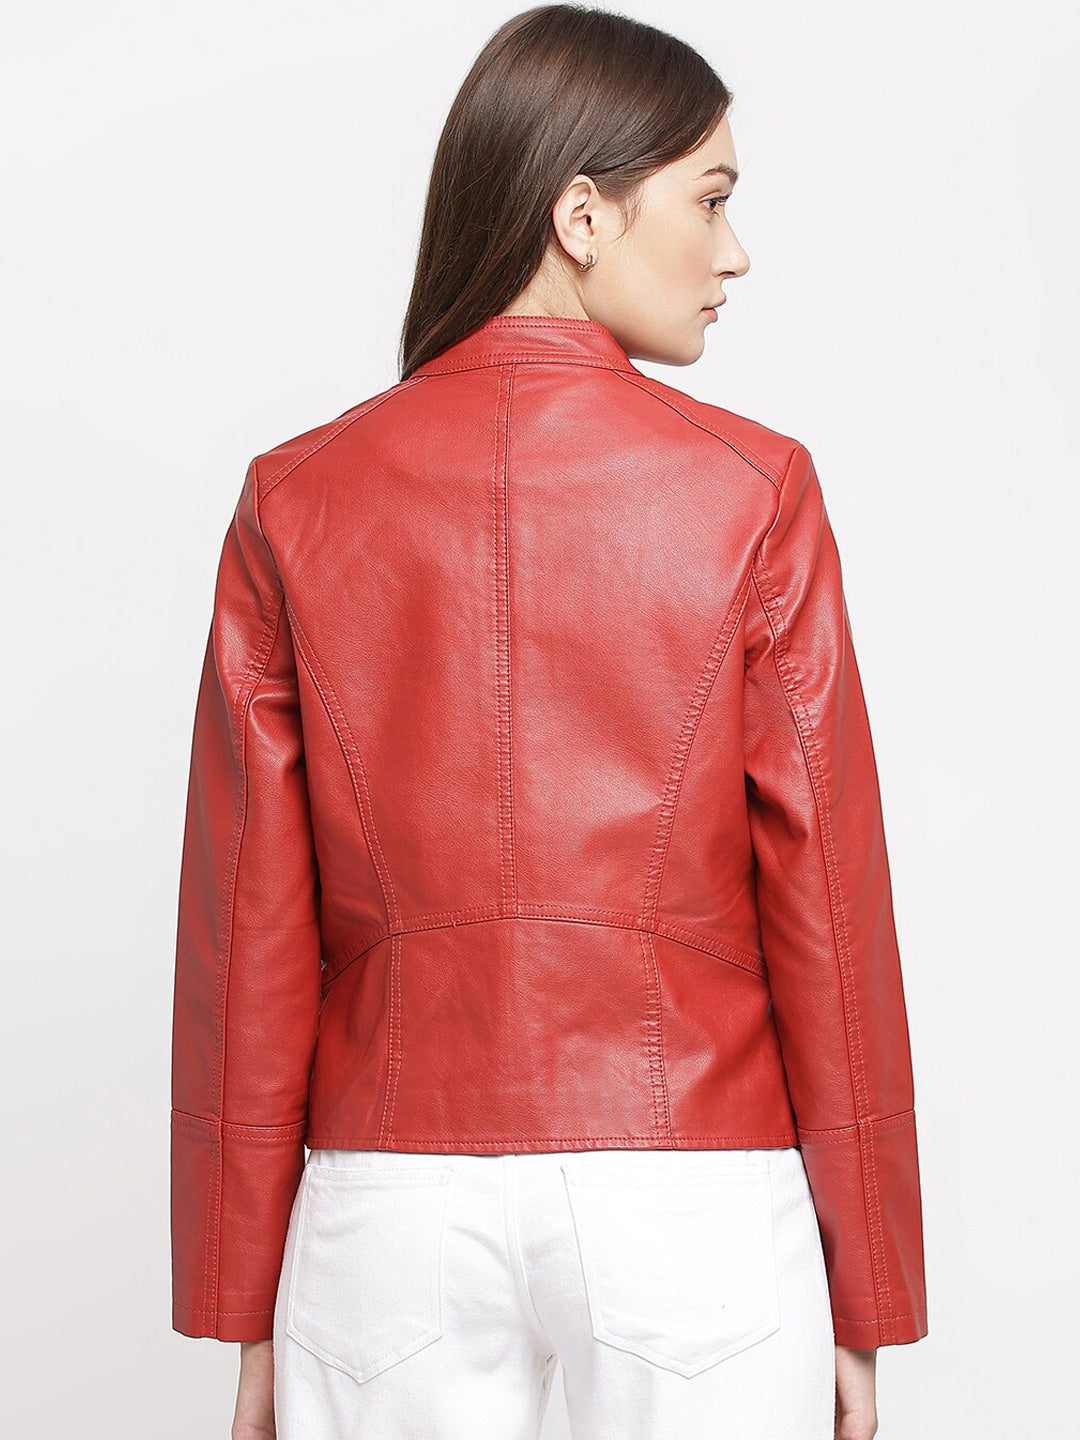 Women Red Leather Jacket | QAWACH